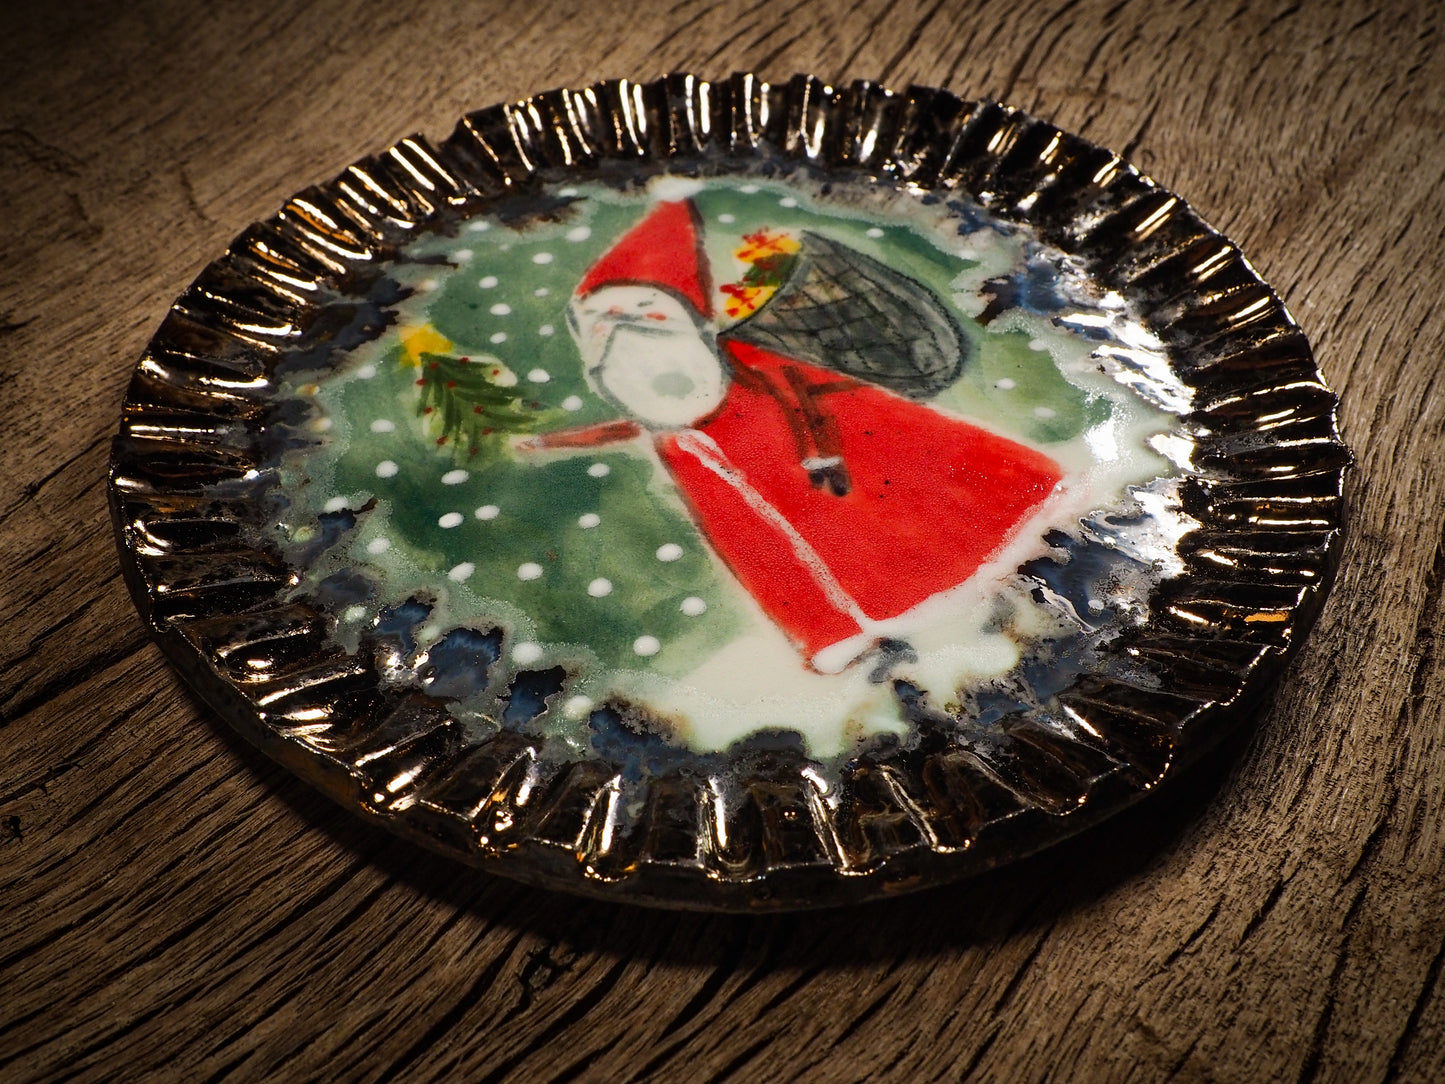 An original Christmas Holiday cake dinner dessert plate round glazed ceramic dinnerware handmade by Idania Salcido, the artist behind Danita Art. Glazed carved sgraffito stoneware, hand painted and decorated, it is illustrated by hand with snowmen, Christmas trees, Santa Claus, angels and snowballs and winter themes.